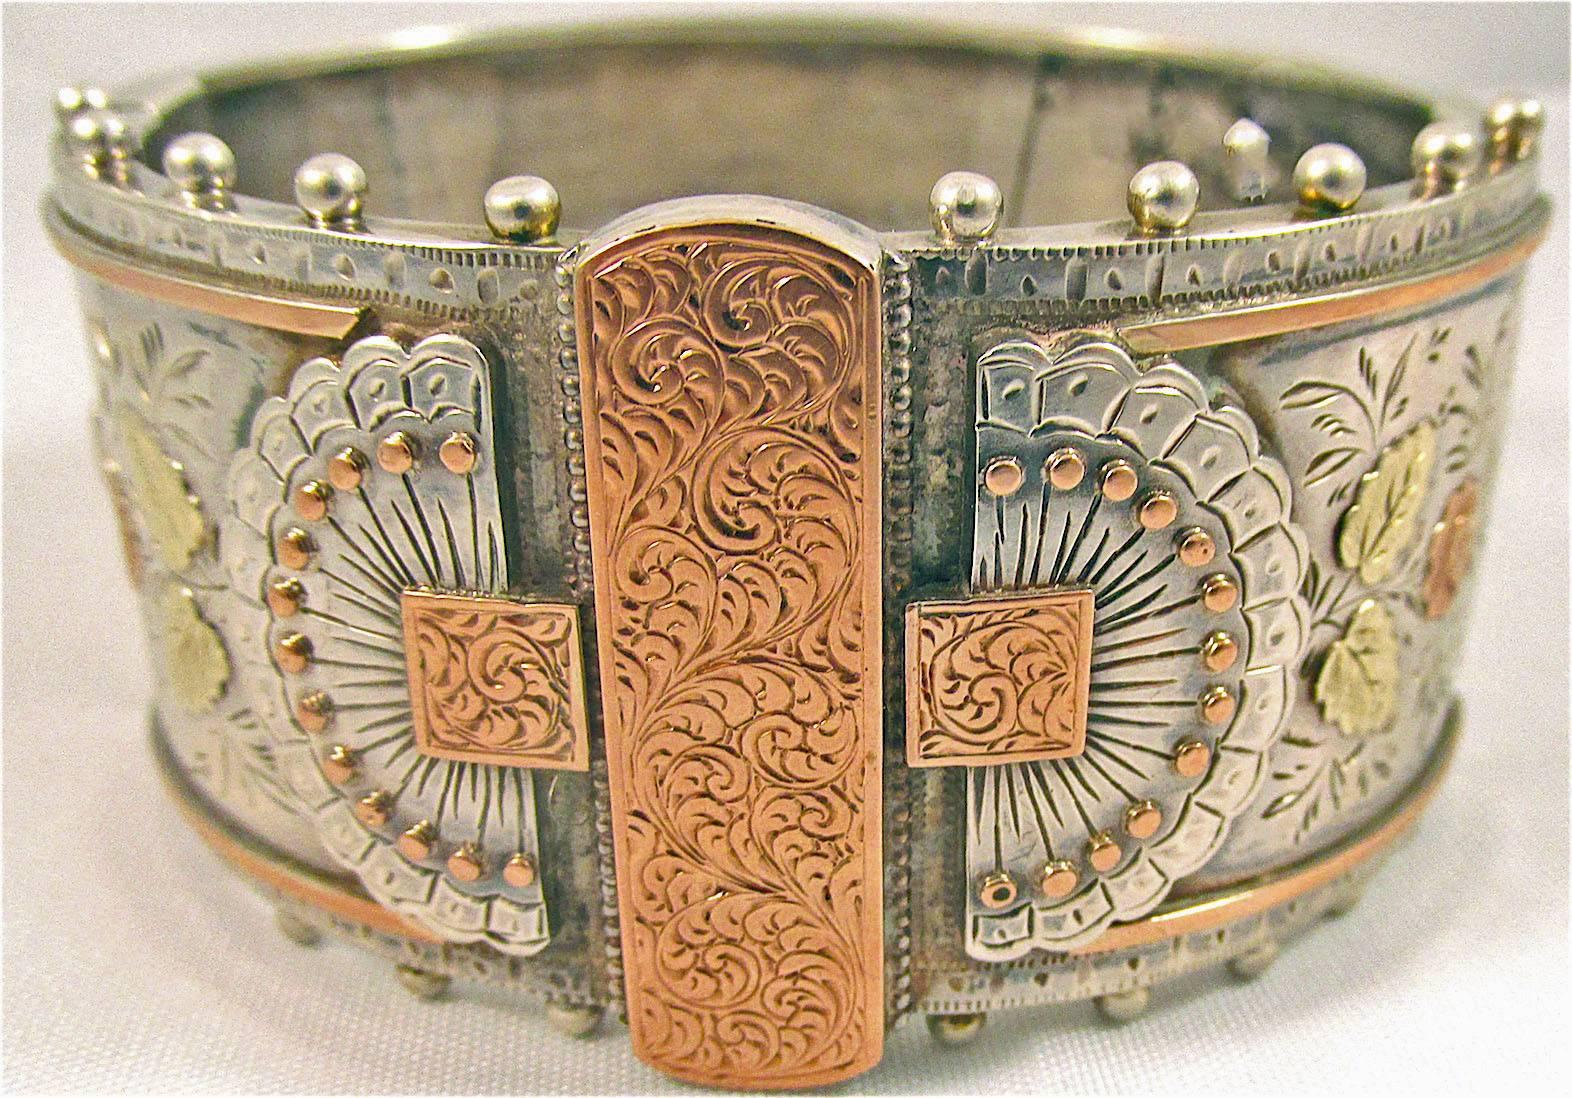 Wonderful Victorian sterling cuff bracelet with a striking design in two-color gold and with beading around the edges. The picture on the hand shows how fantastic this piece is. The bangle measures 1 3/8